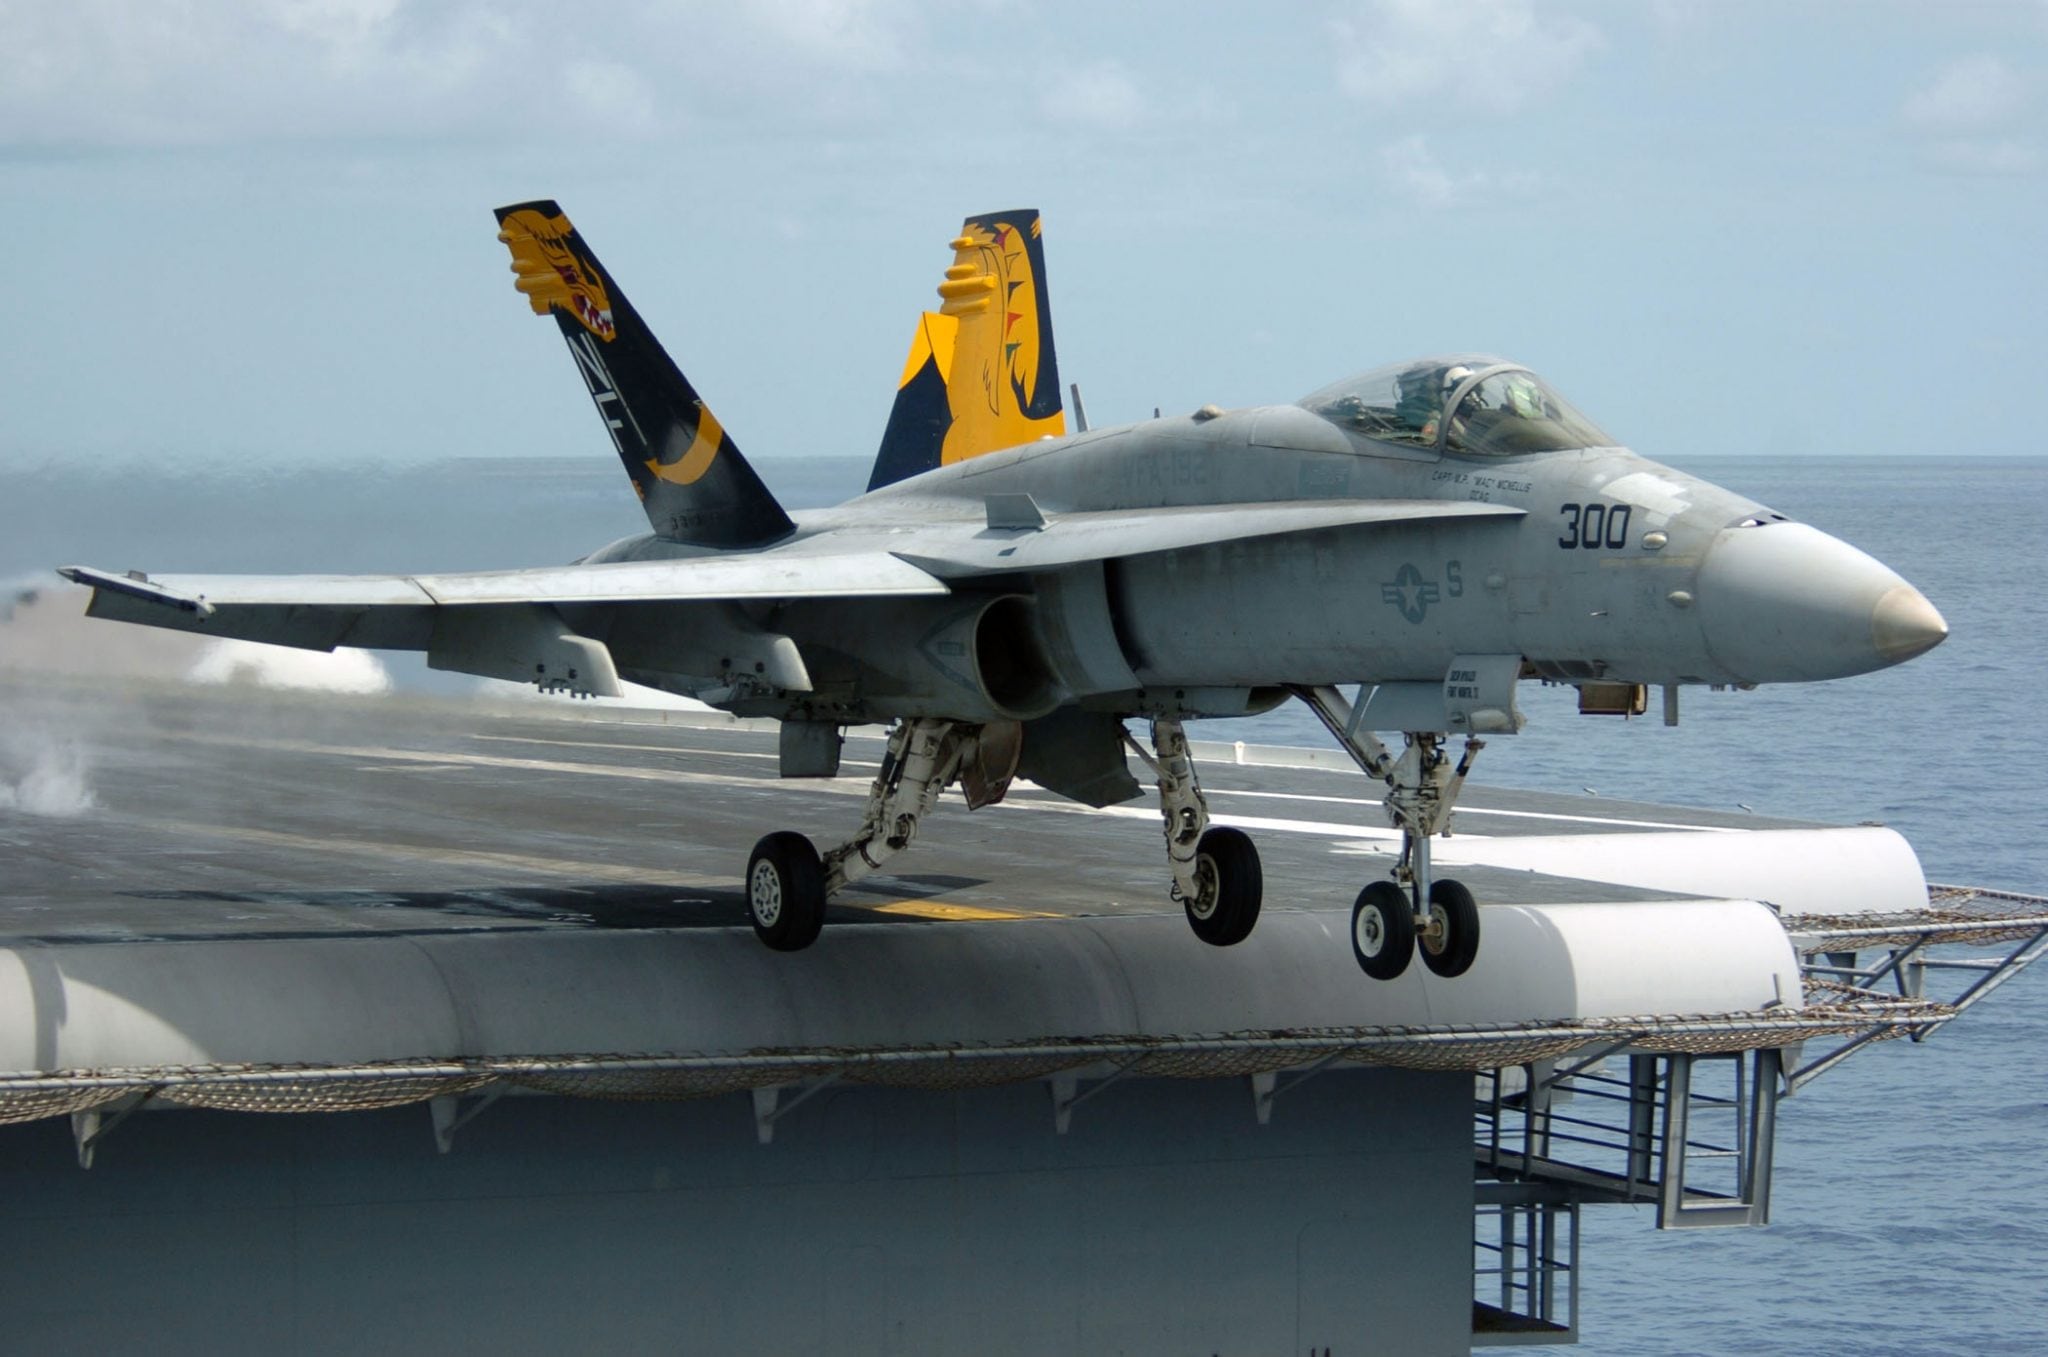 050817-N-3488C-028 Pacific Ocean (Aug. 17, 2005) - An F/A-18C Hornet, assigned to the "Golden Dragons" of Strike Fighter Squadron One Nine Two (VFA-192), launches from the flight deck of the conventionally powered aircraft carrier USS Kitty Hawk (CV 63). Kitty Hawk and embarked Carrier Air Wing Five (CVW-5) are currently returning to their homeport after a scheduled deployment in the 7th Fleet area of responsibility. U.S. Navy photo by Photographer's Mate 3rd Class Jonathan Chandler (RELEASED)